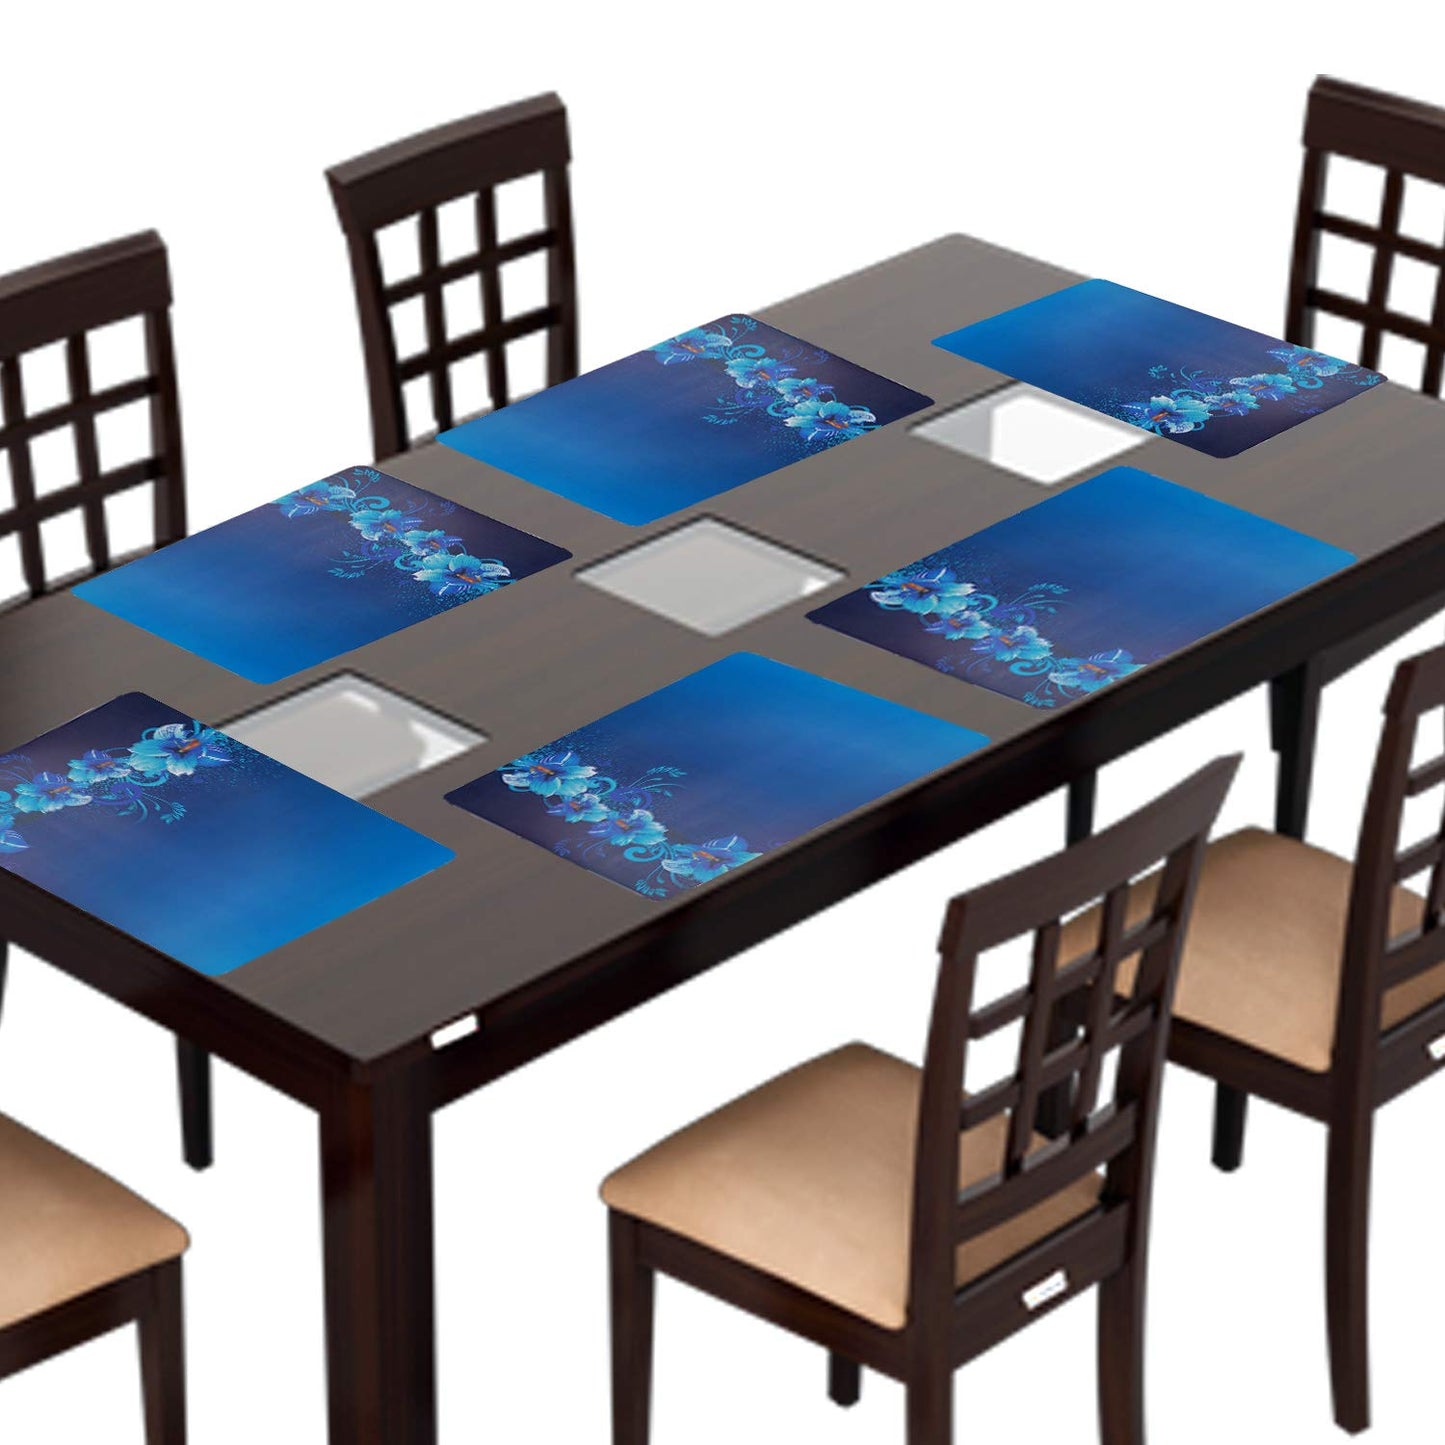 Weavers Villa PVC Printed Table Placemats for Dining Table, Fridge and Kitchen (43 cm X 28 cm) - Set of 6 Pieces